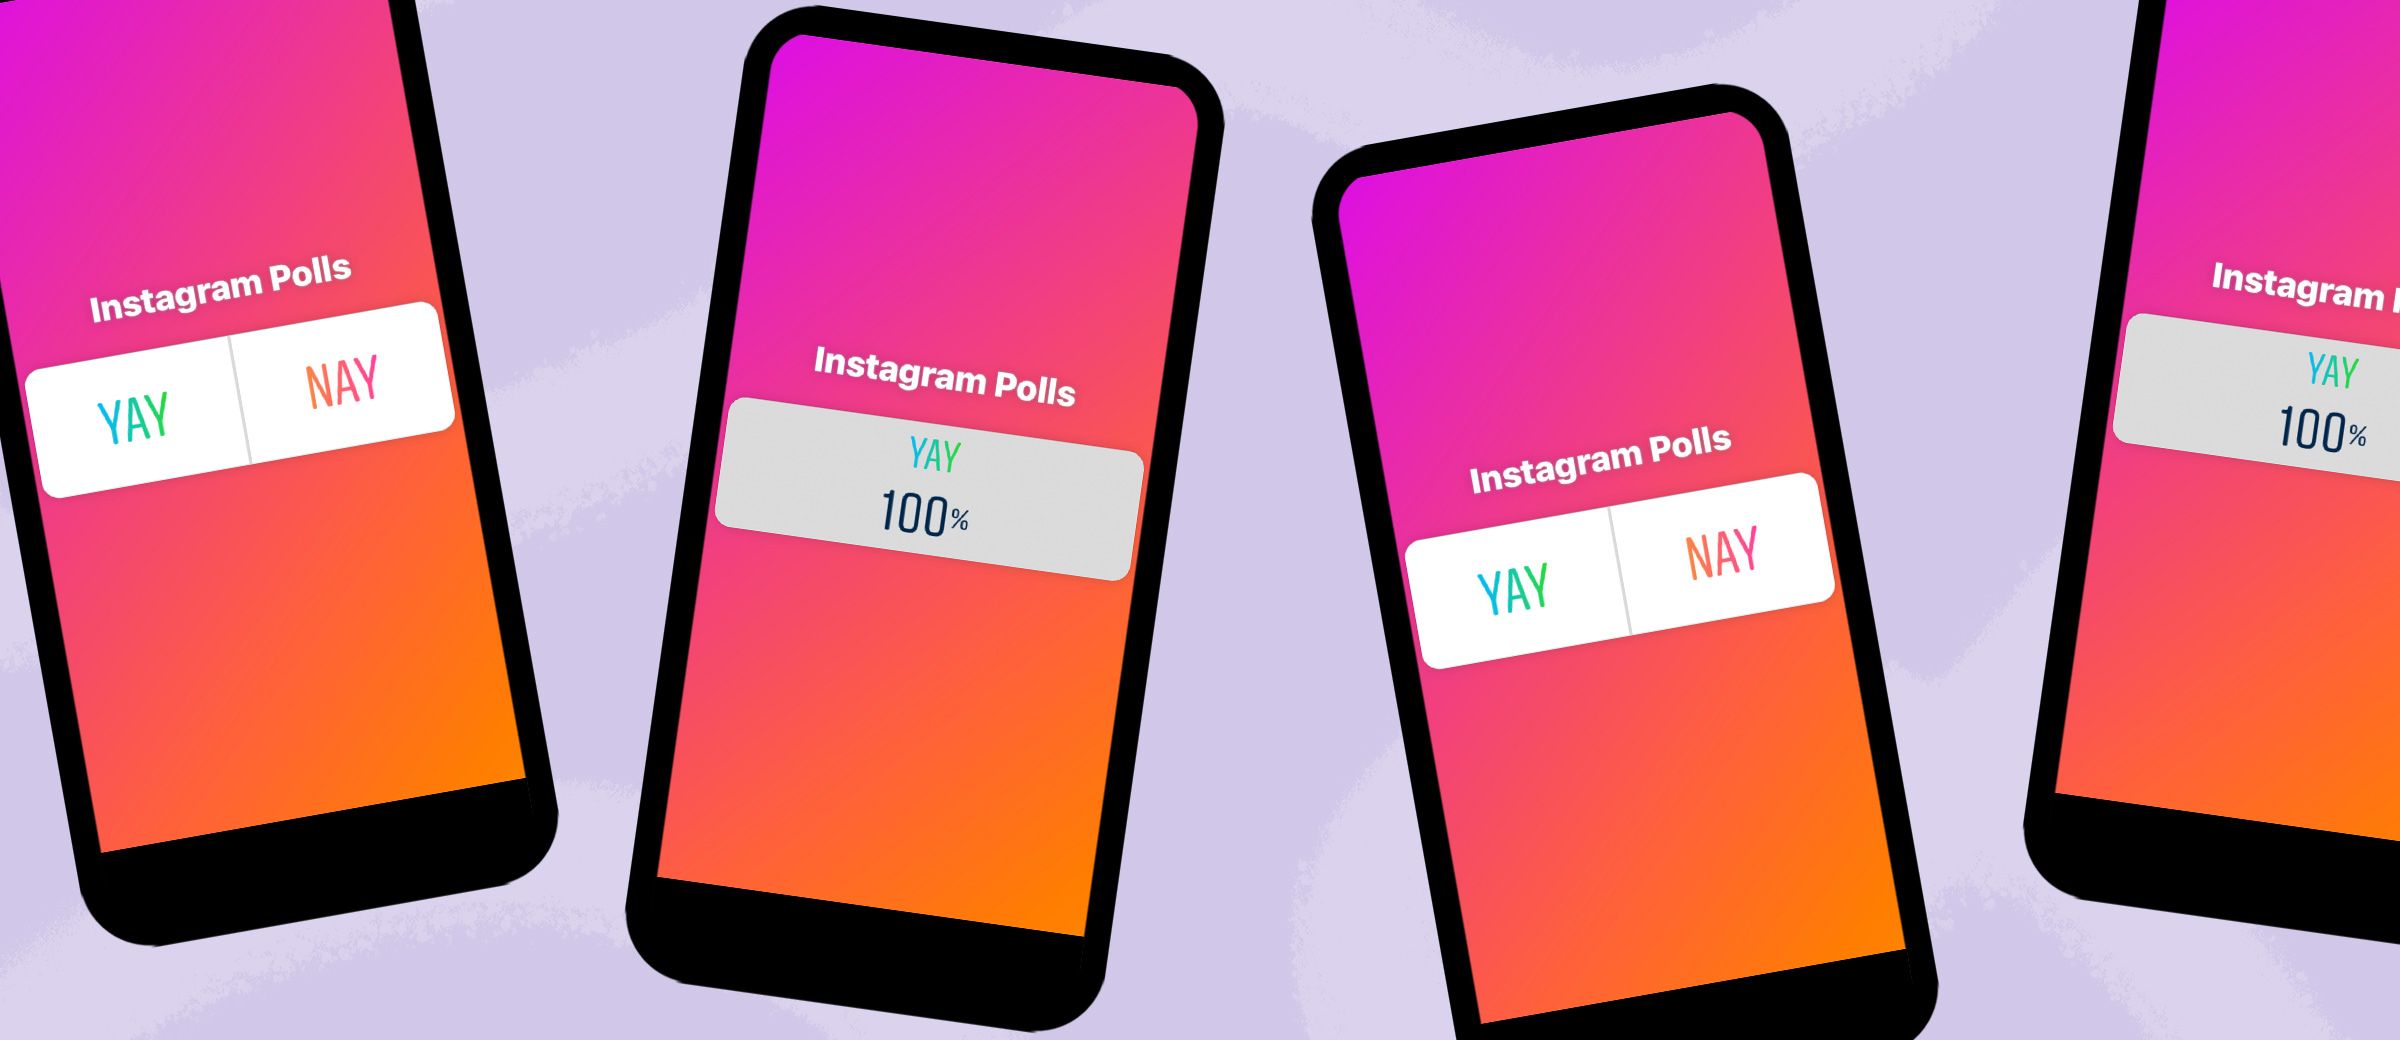 PLANOLY-Blog-Post--How-to-Use-IG-Polls-to-Grow-Your-Engagement--Feature-Image